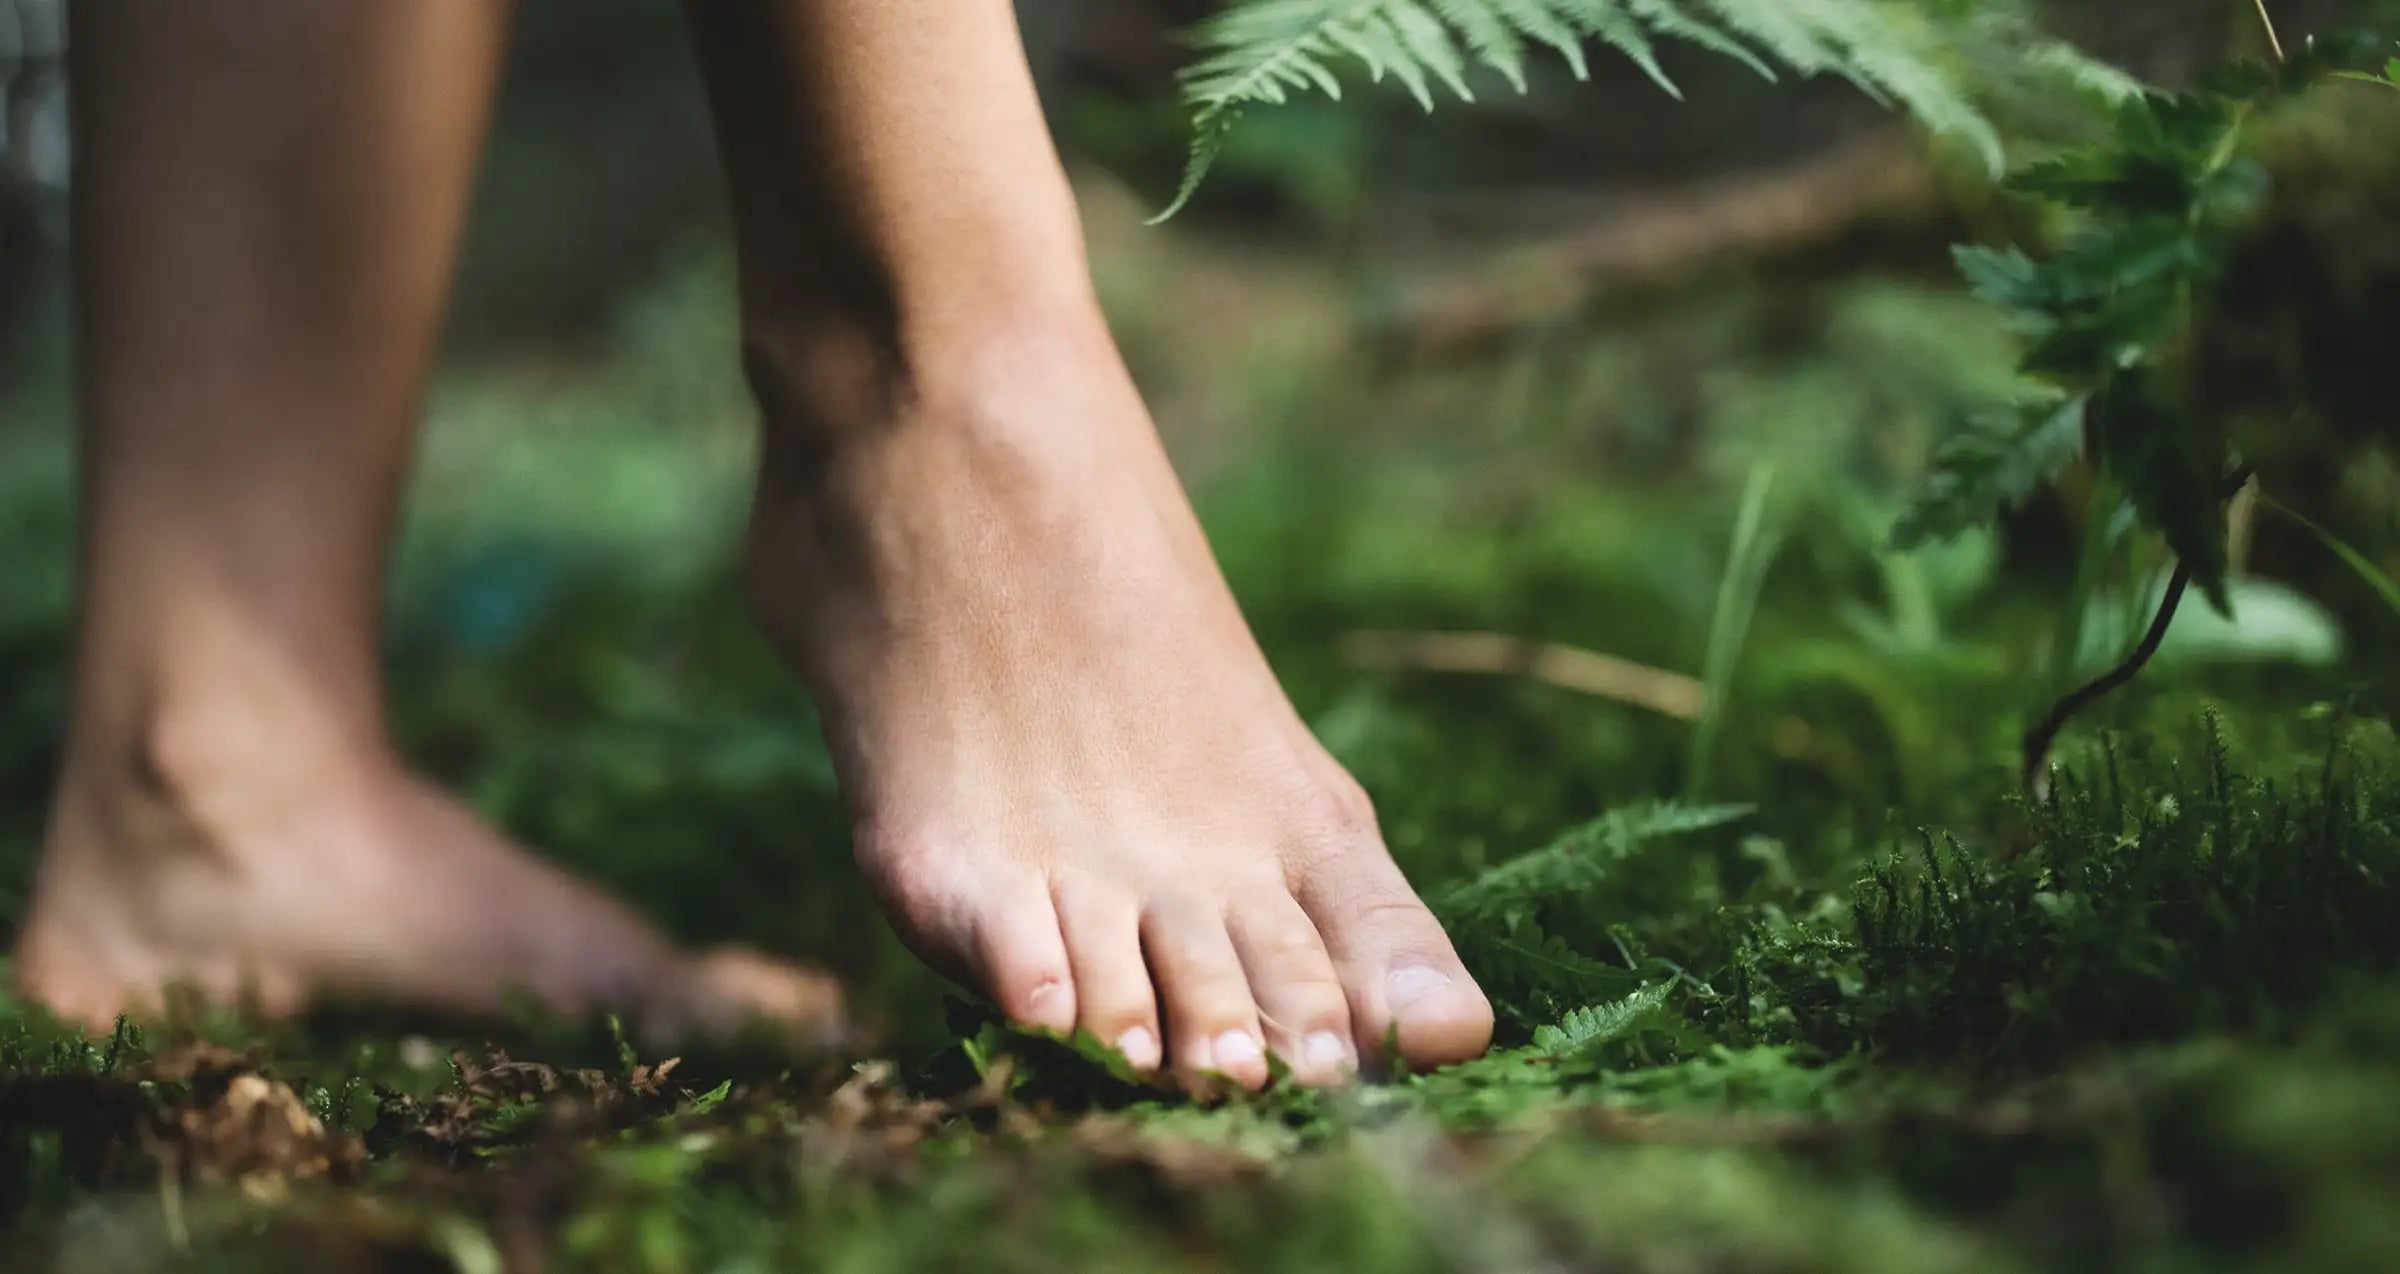 Foot in nature